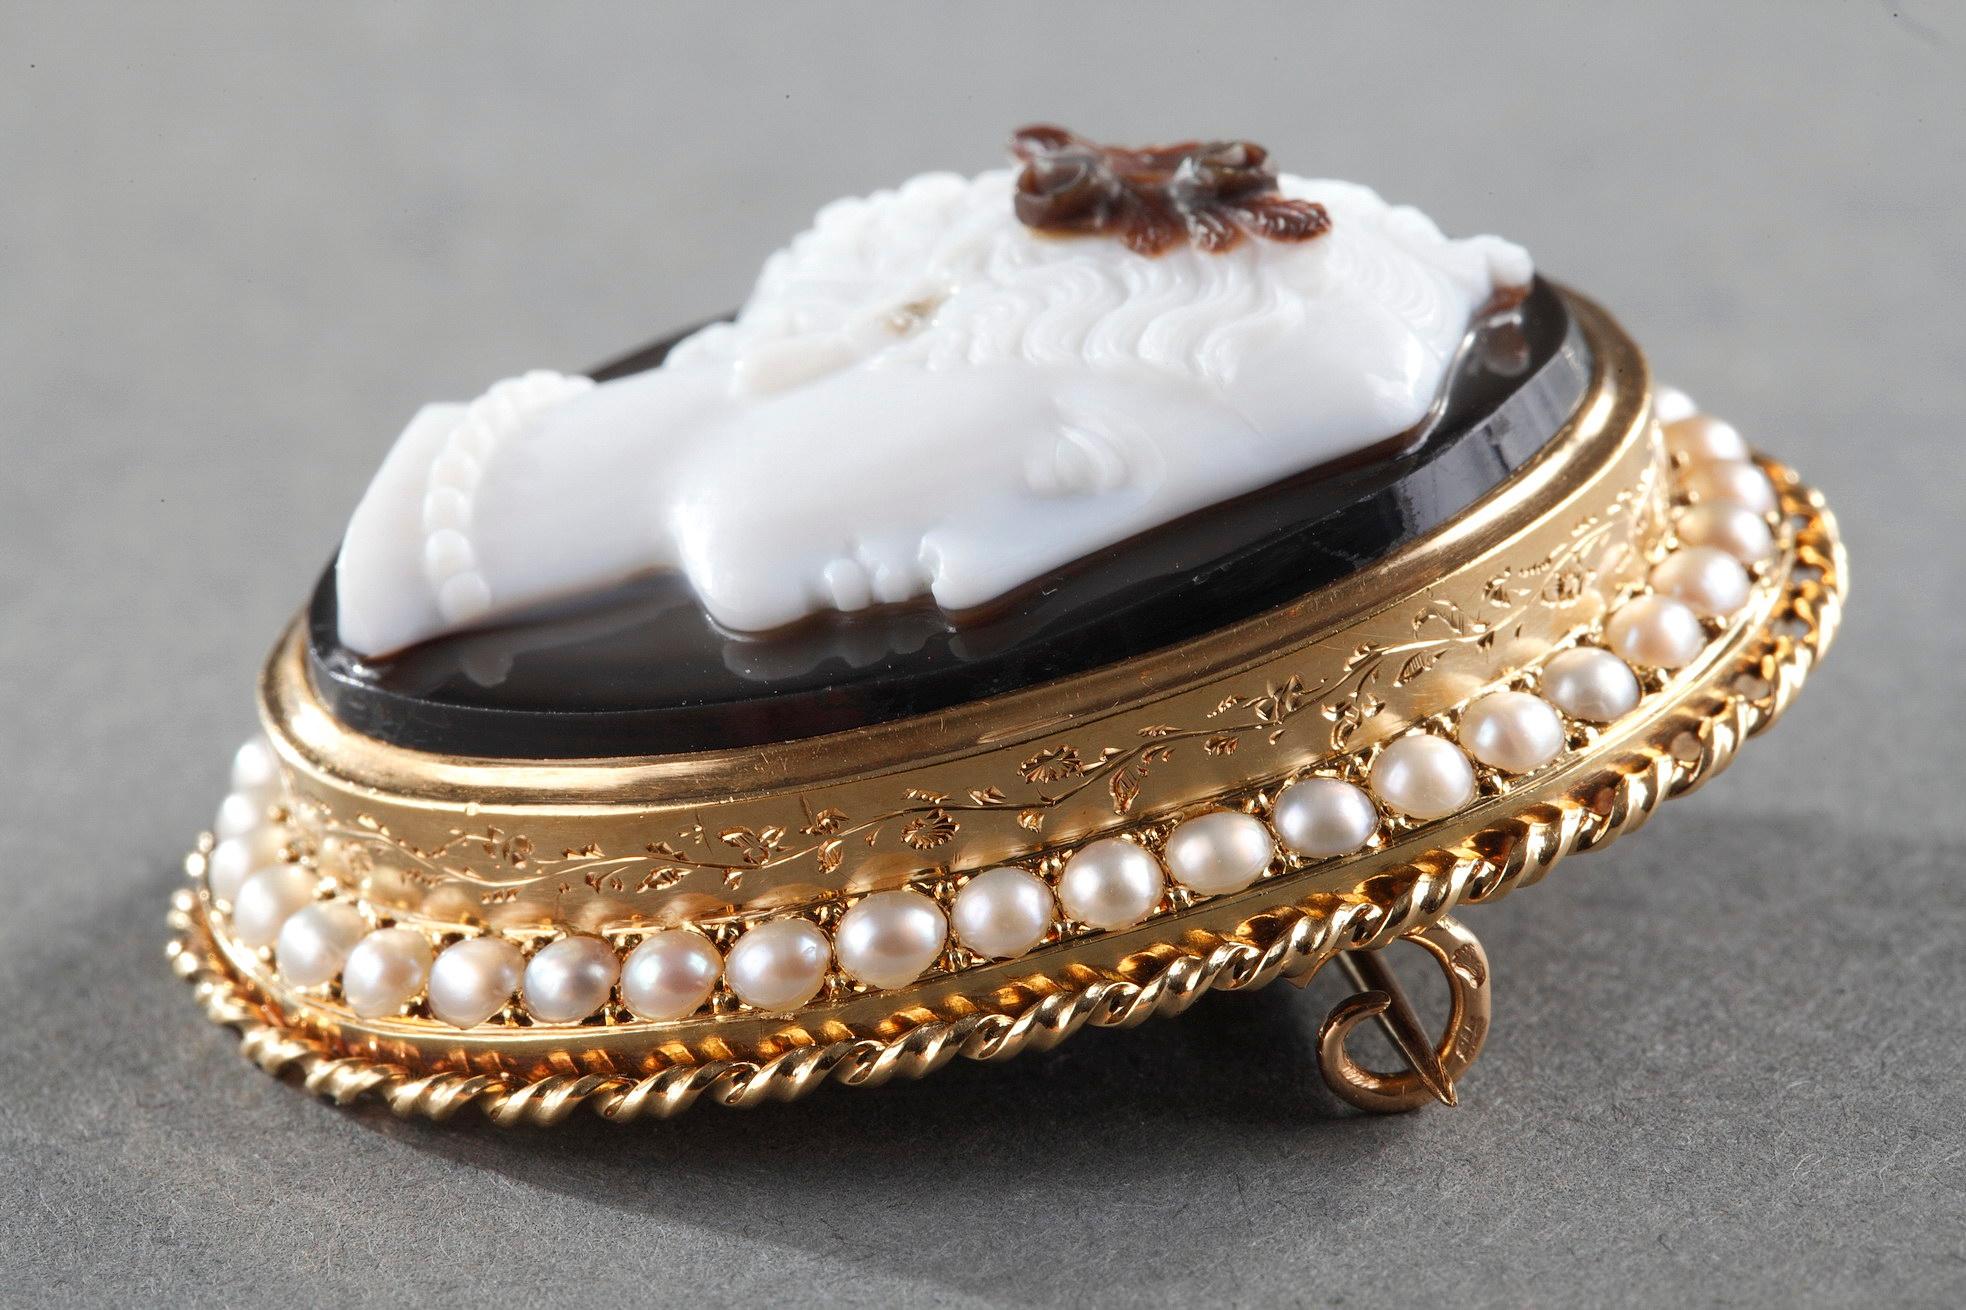 Gold-Mounted Agate Cameo Brooch, Second Part of the 19th Century, Napoleon III 8